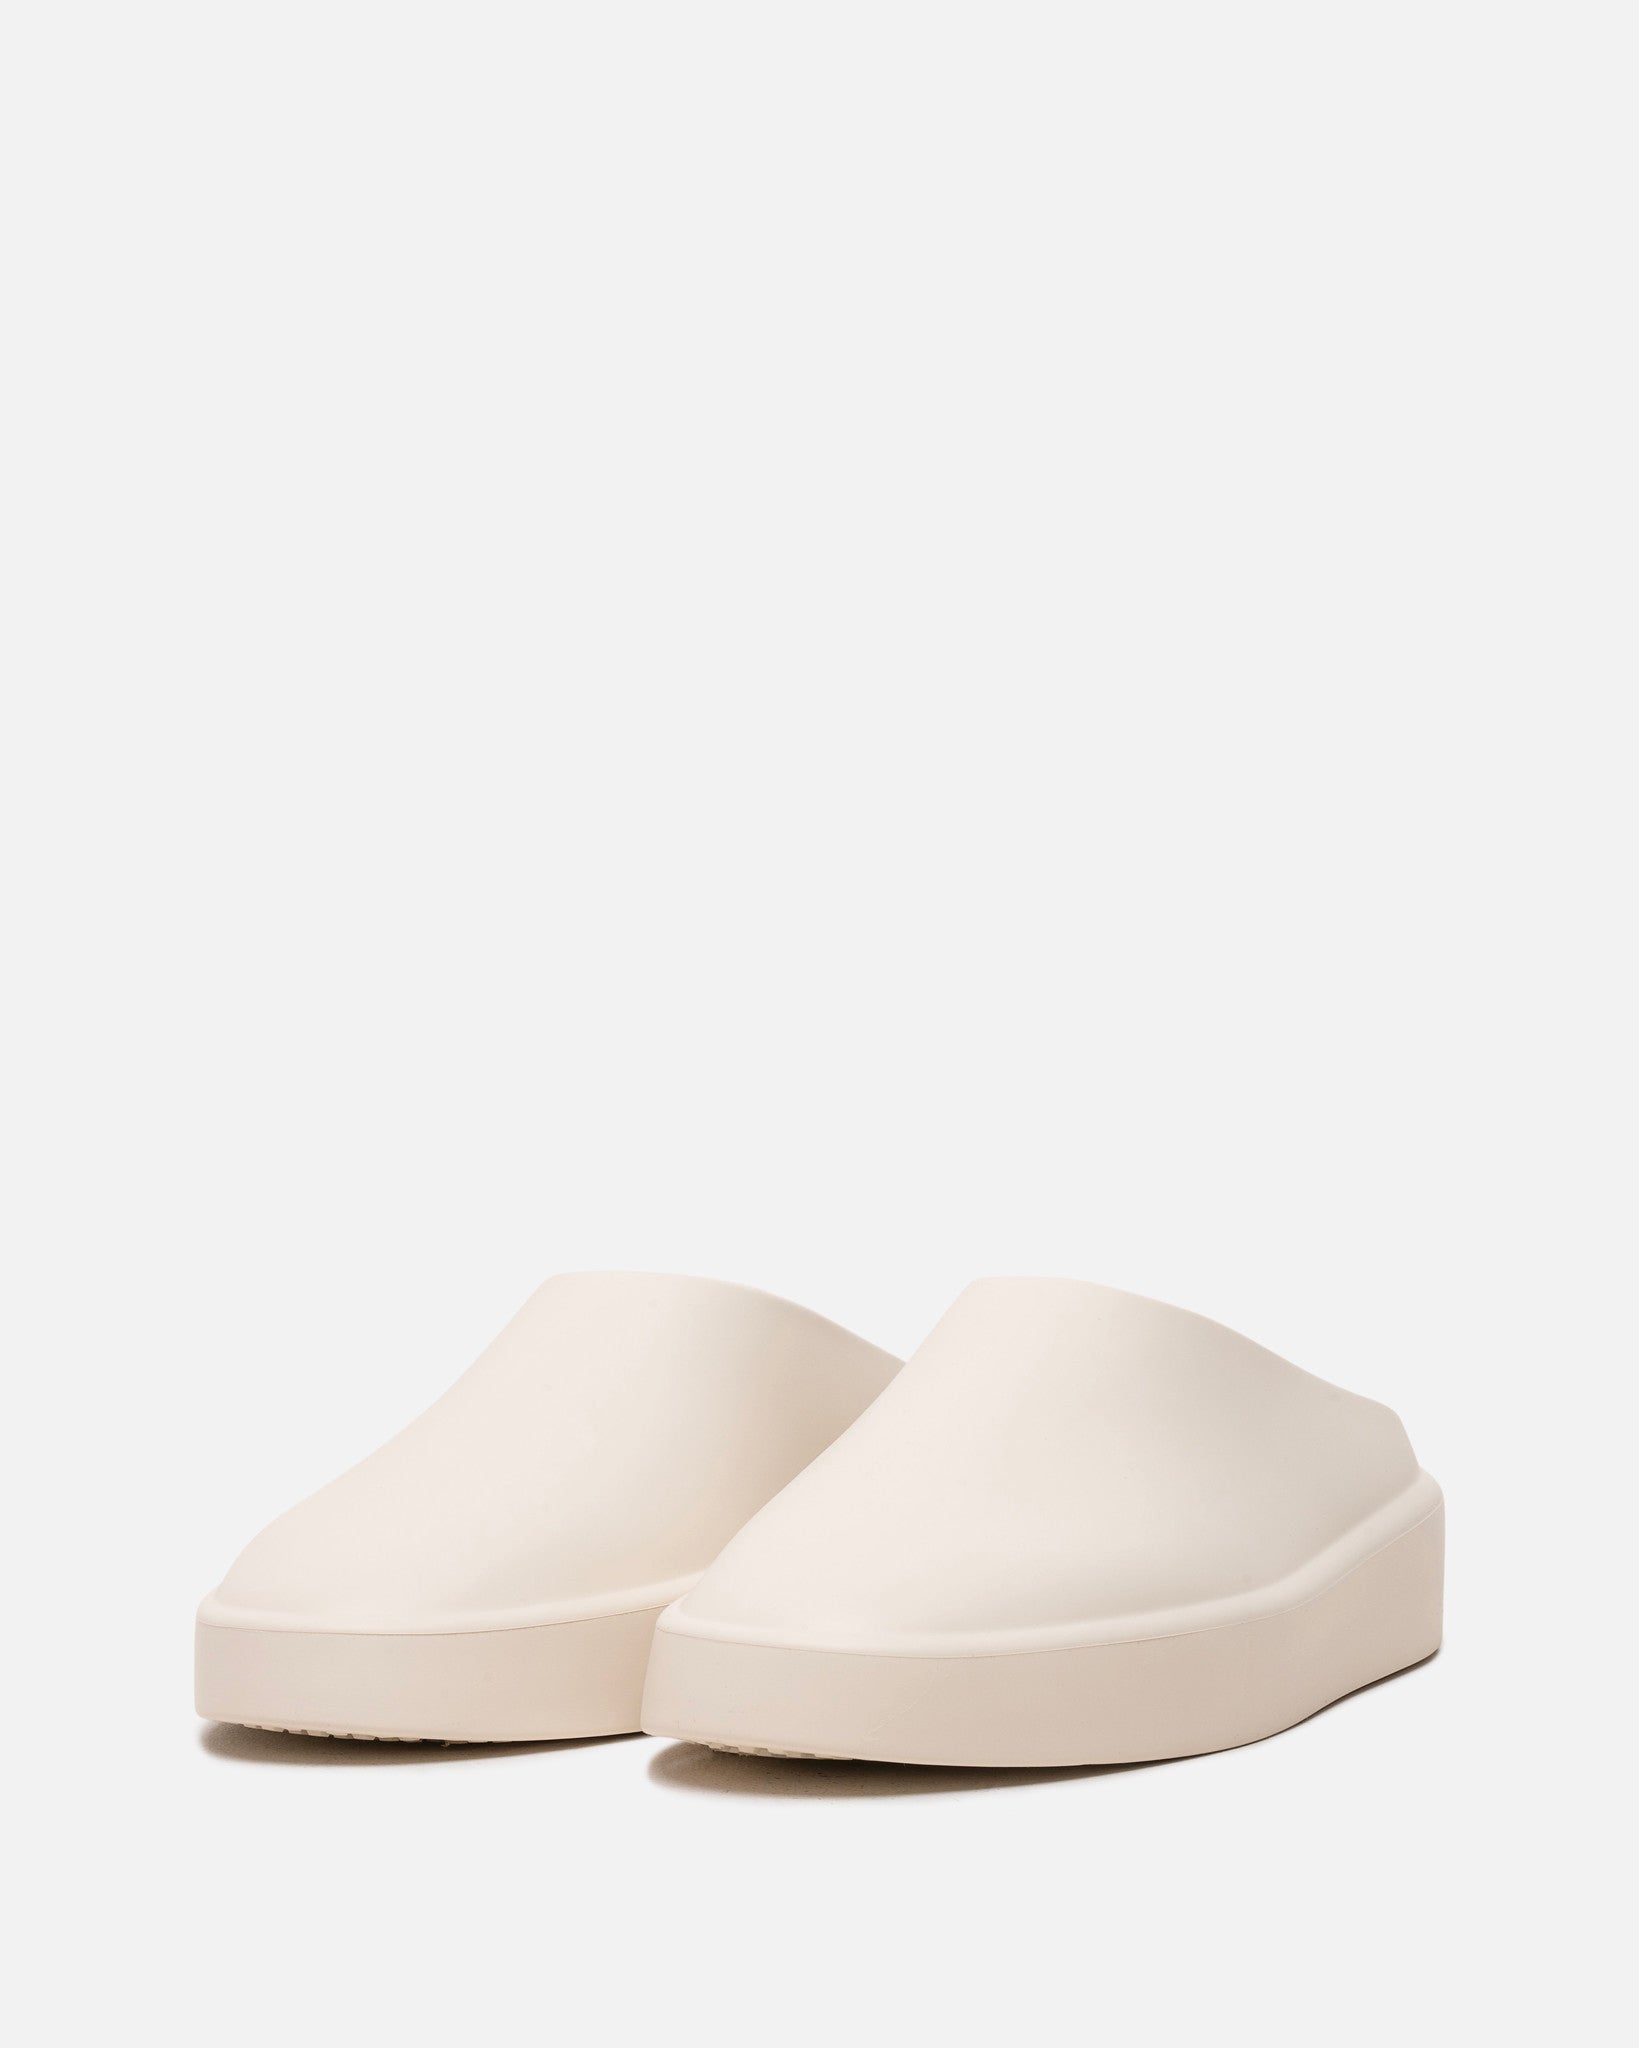 Fear of God Women's Shoes The California 1.0 in Greige